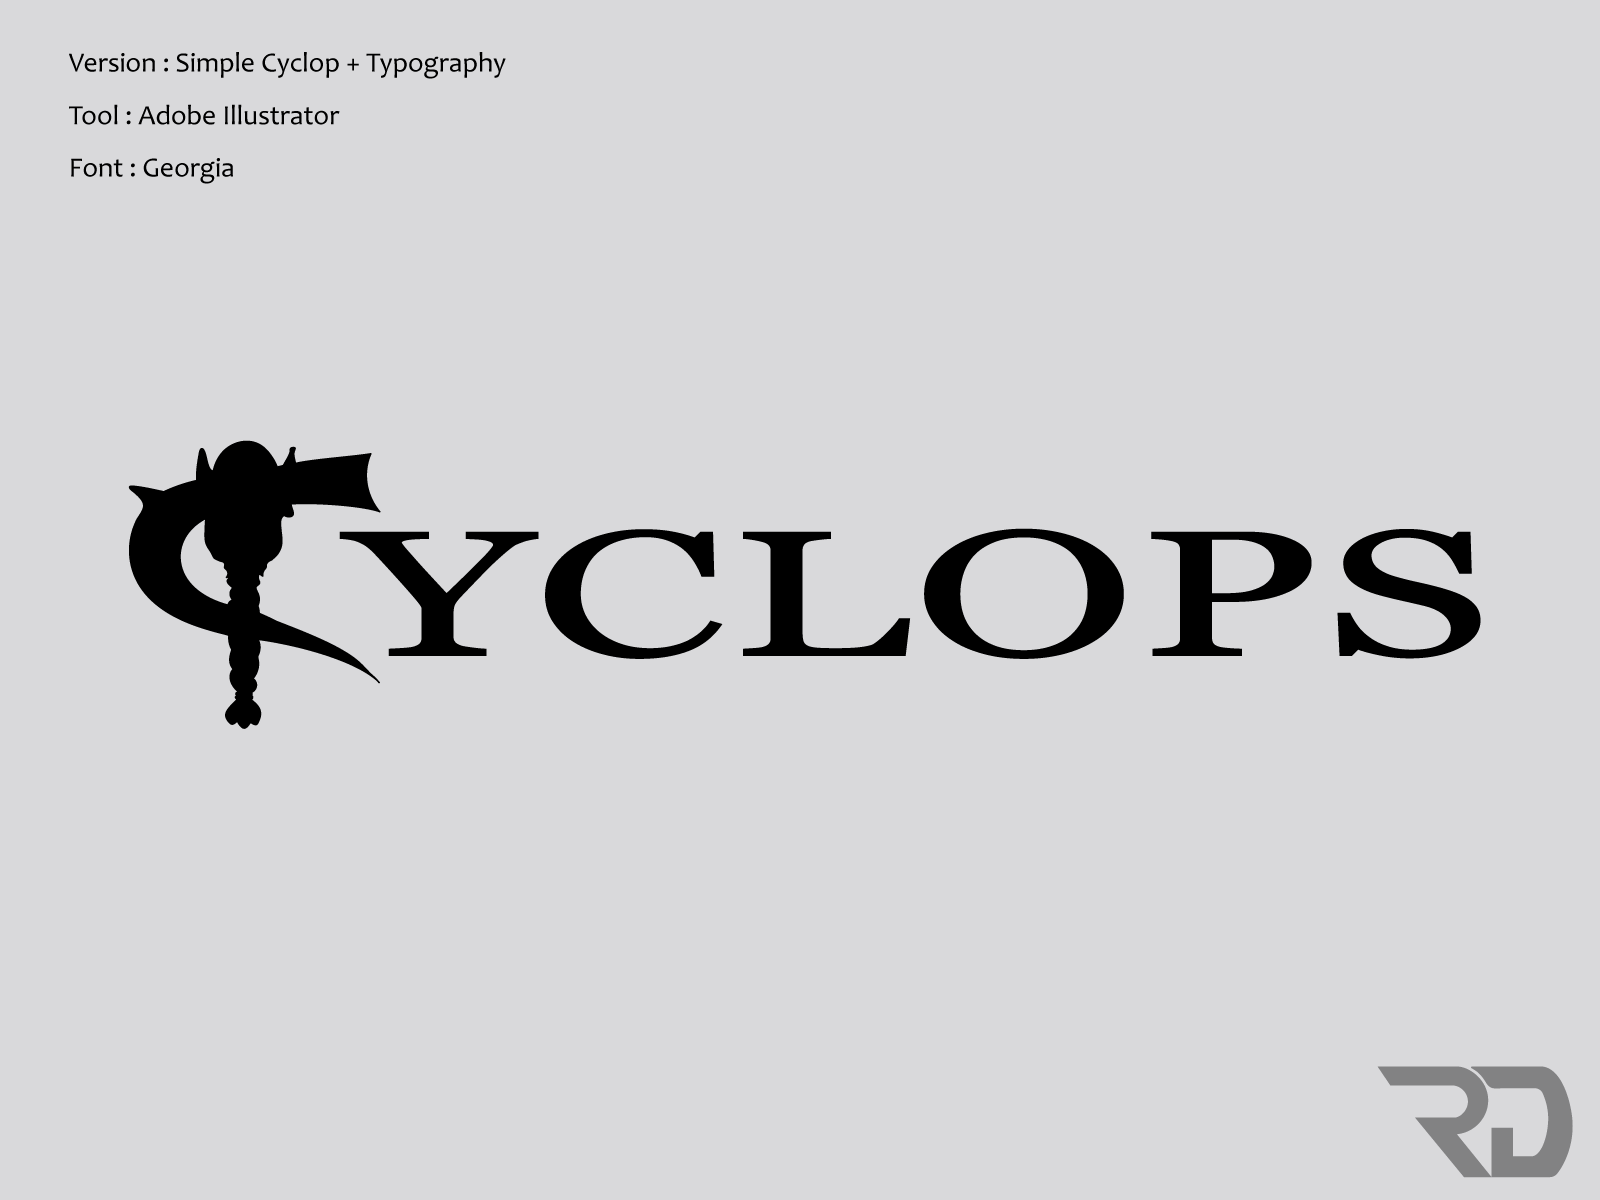 Simple Cyclop + Typography